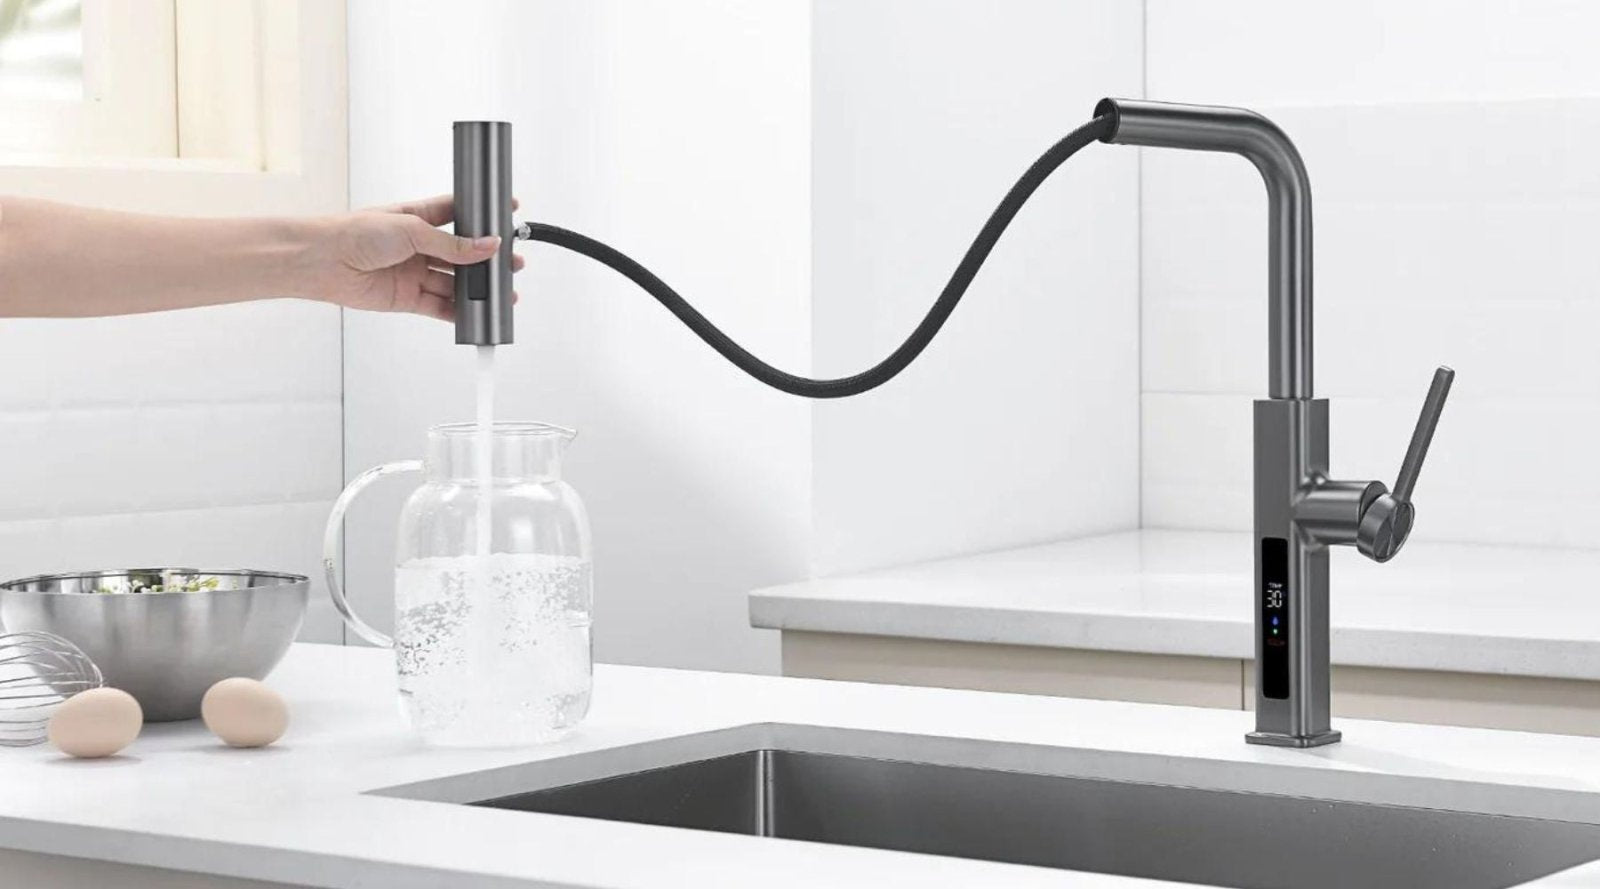 Stainless Steel Kitchen Faucets Care And Cleaning Guide - Lefton Home